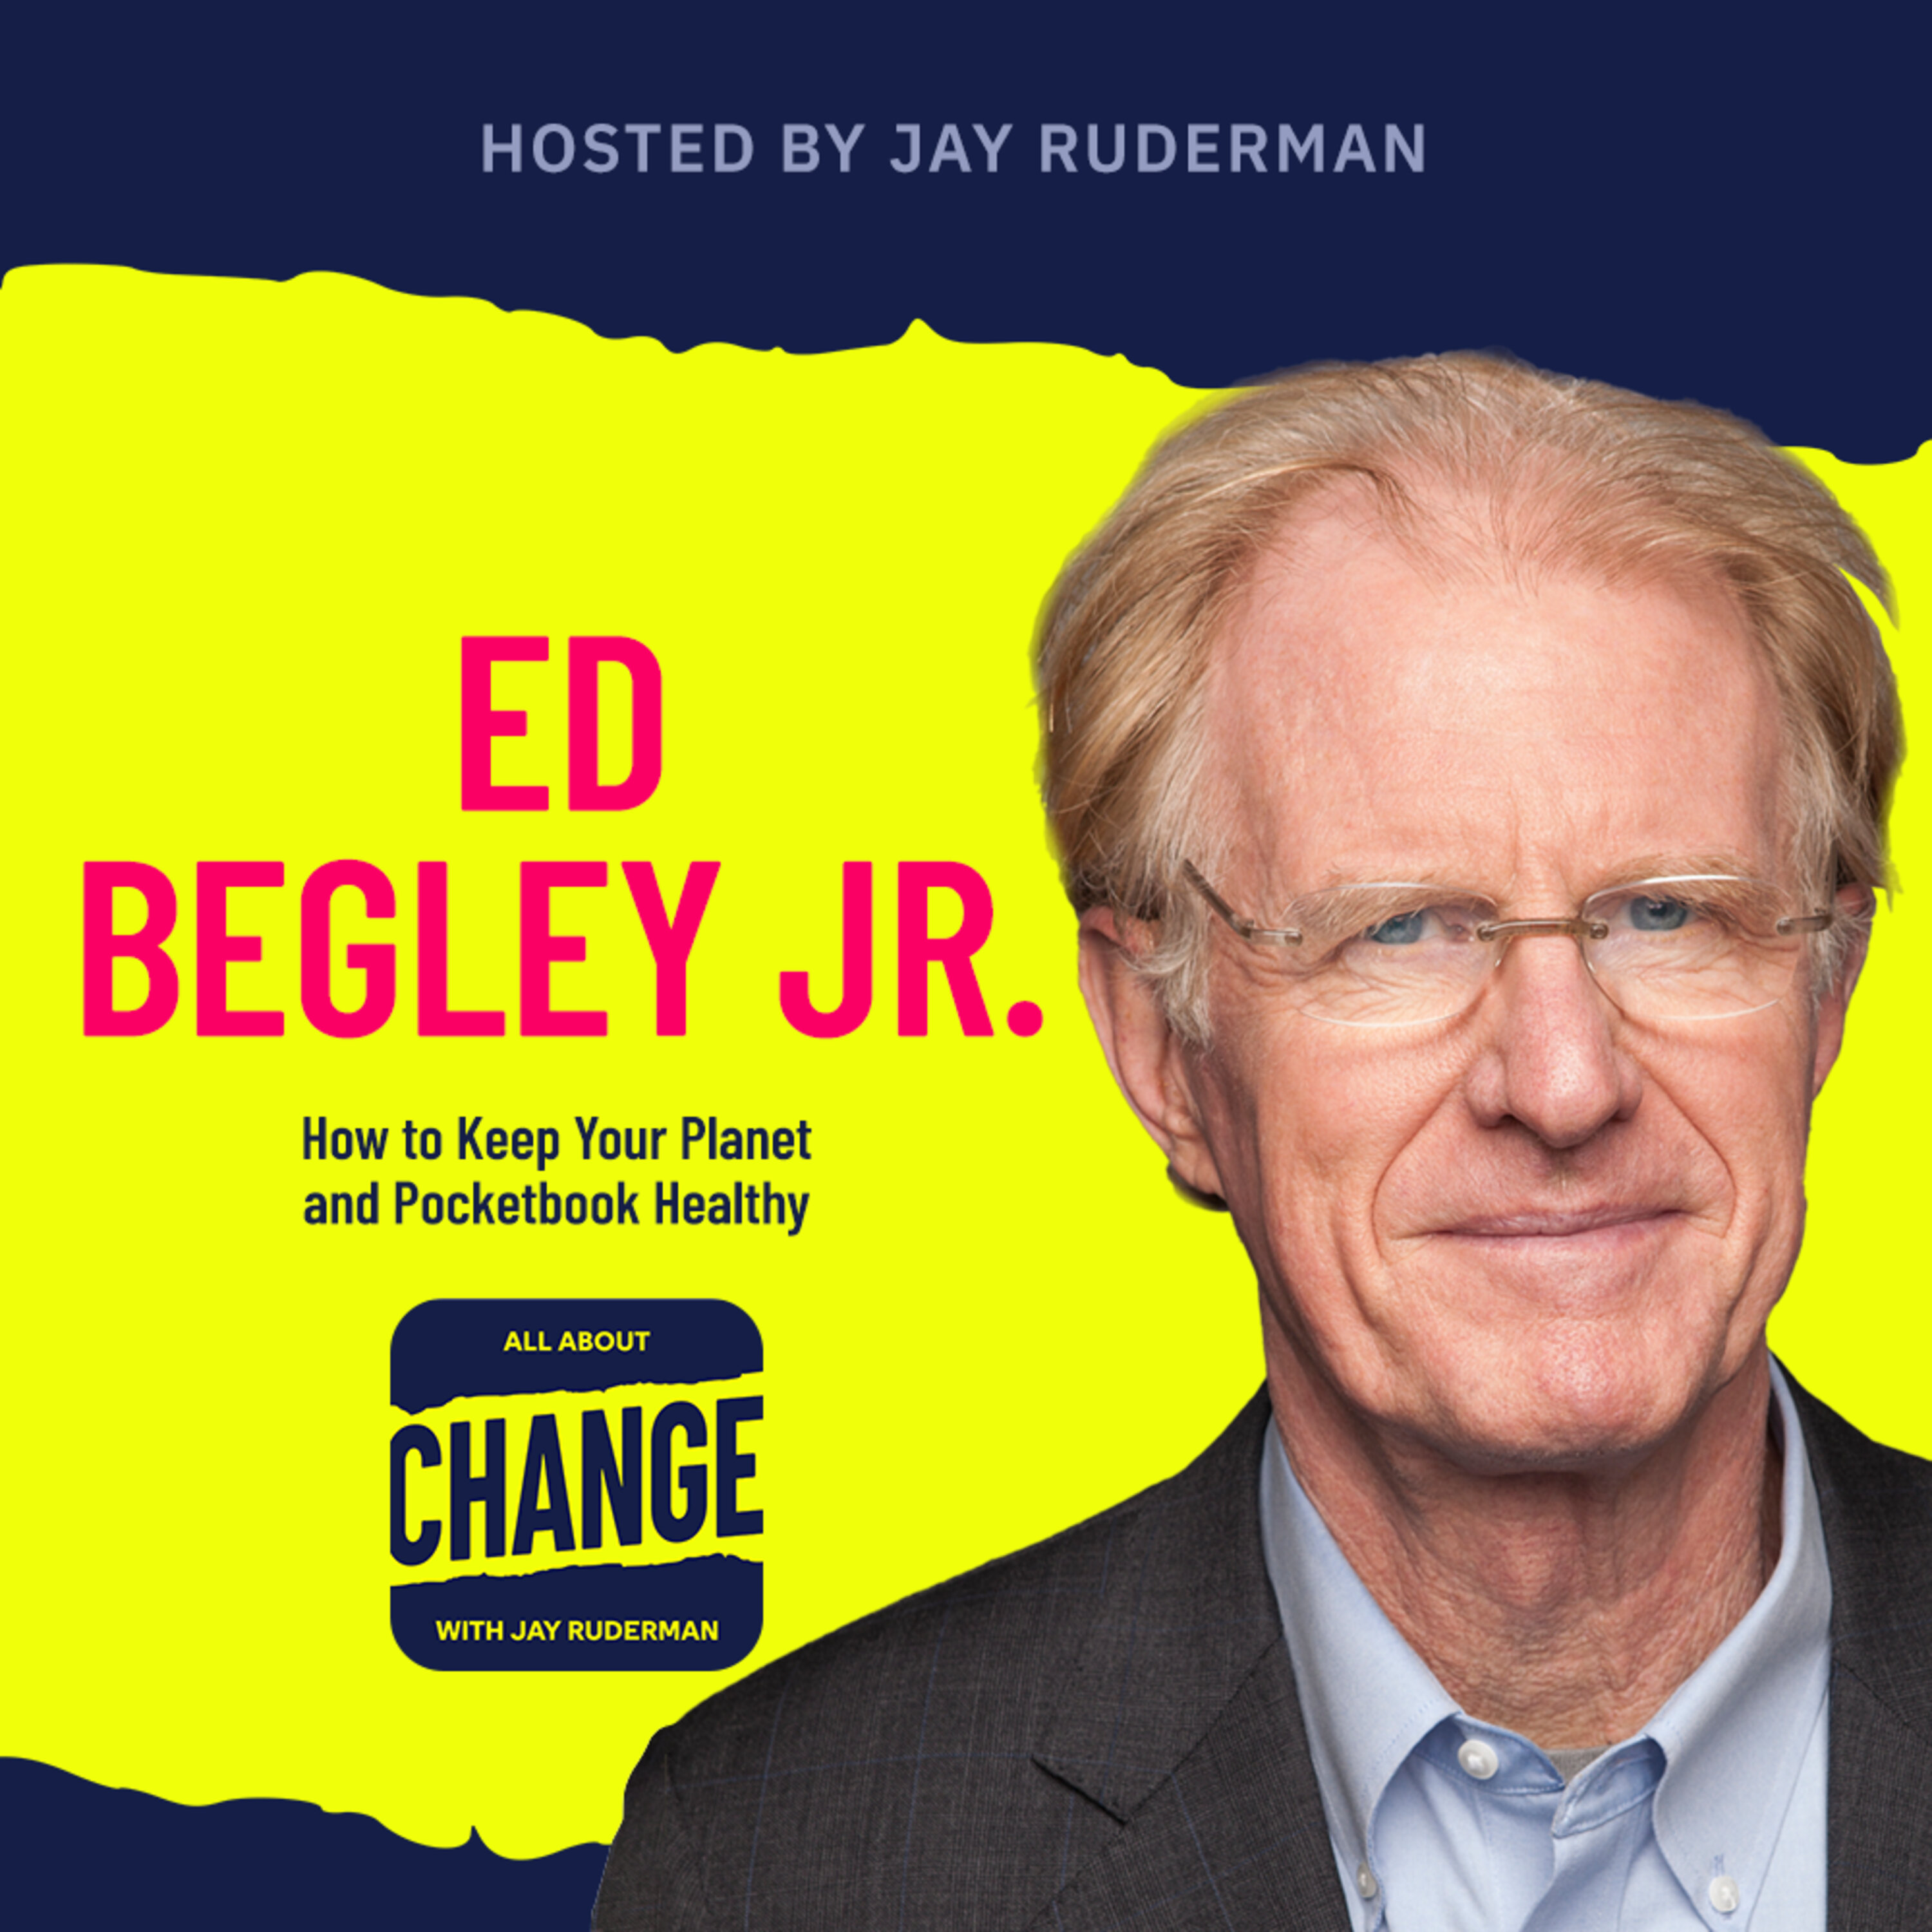 Ed Begley Jr - How to Keep Your Planet and Pocketbook Healthy